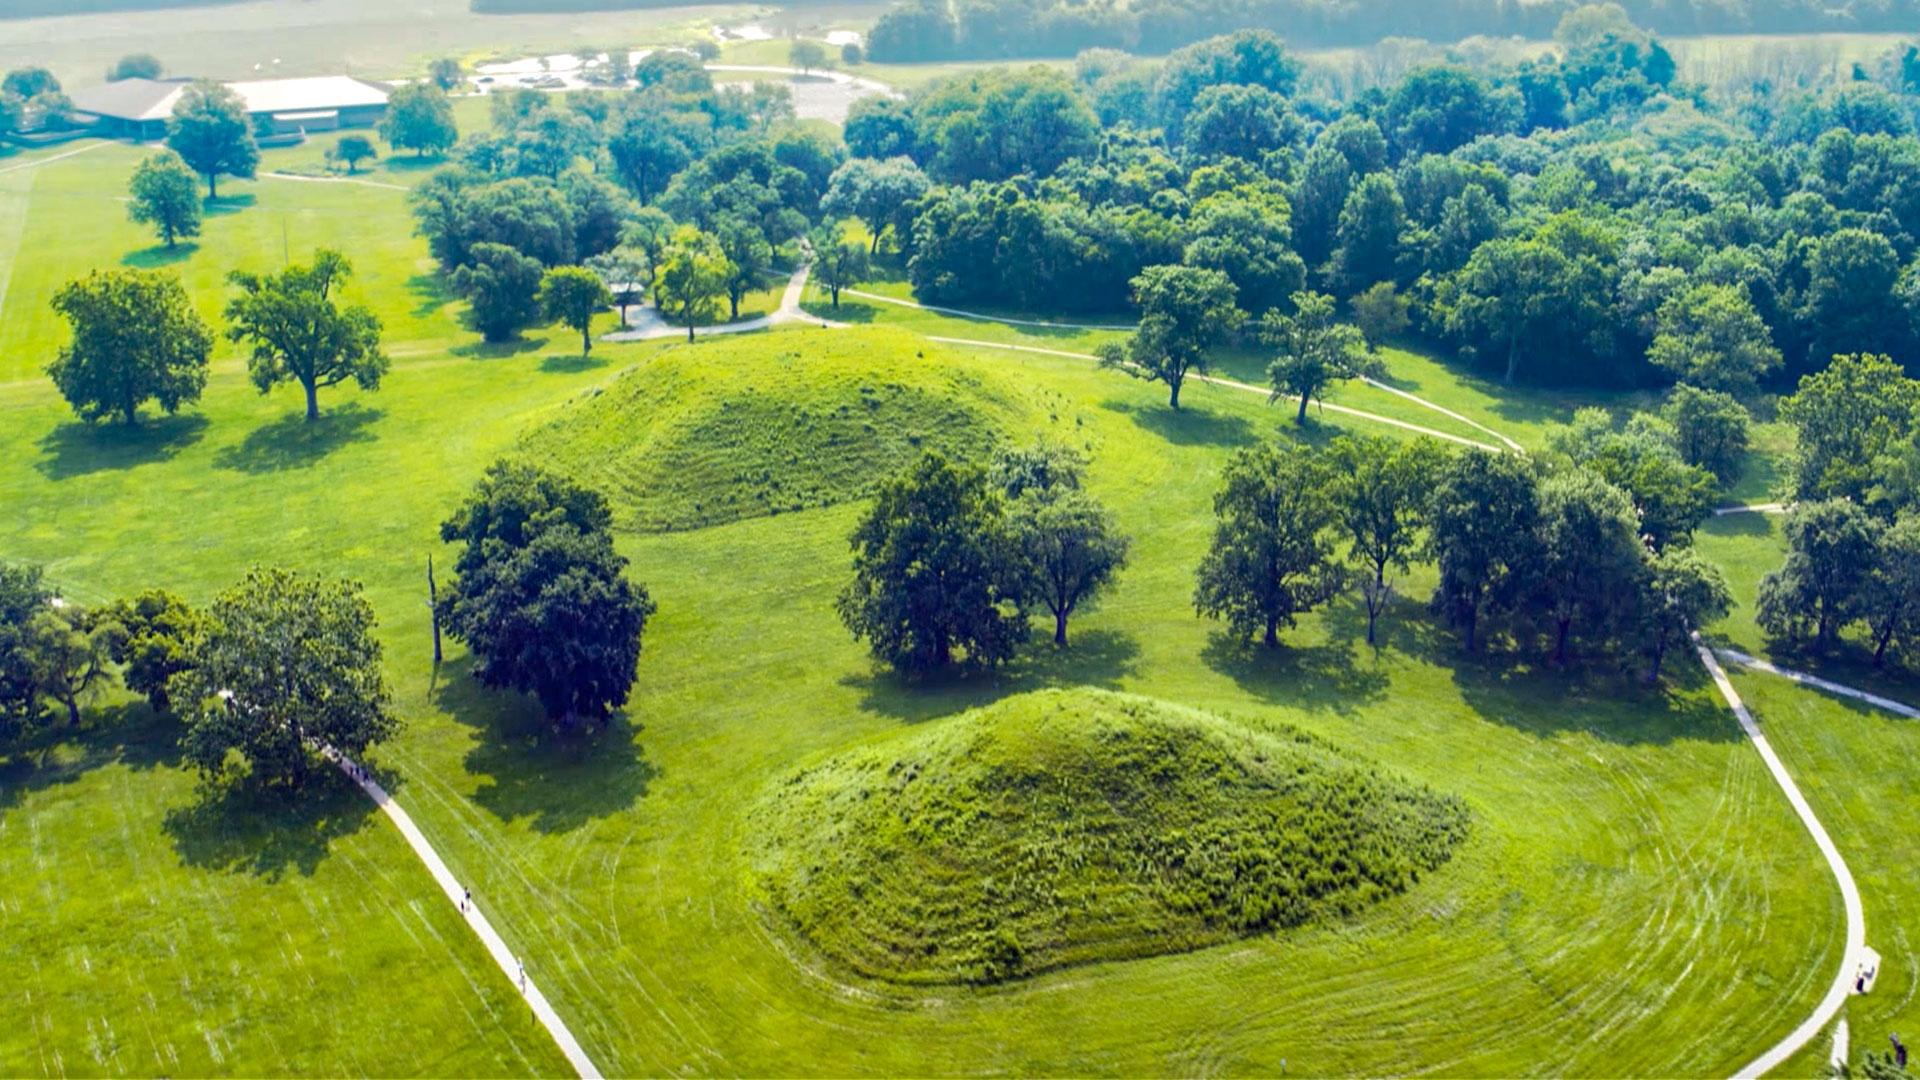 Two earthen mounds in Cahokia, Illinois as seen from the air